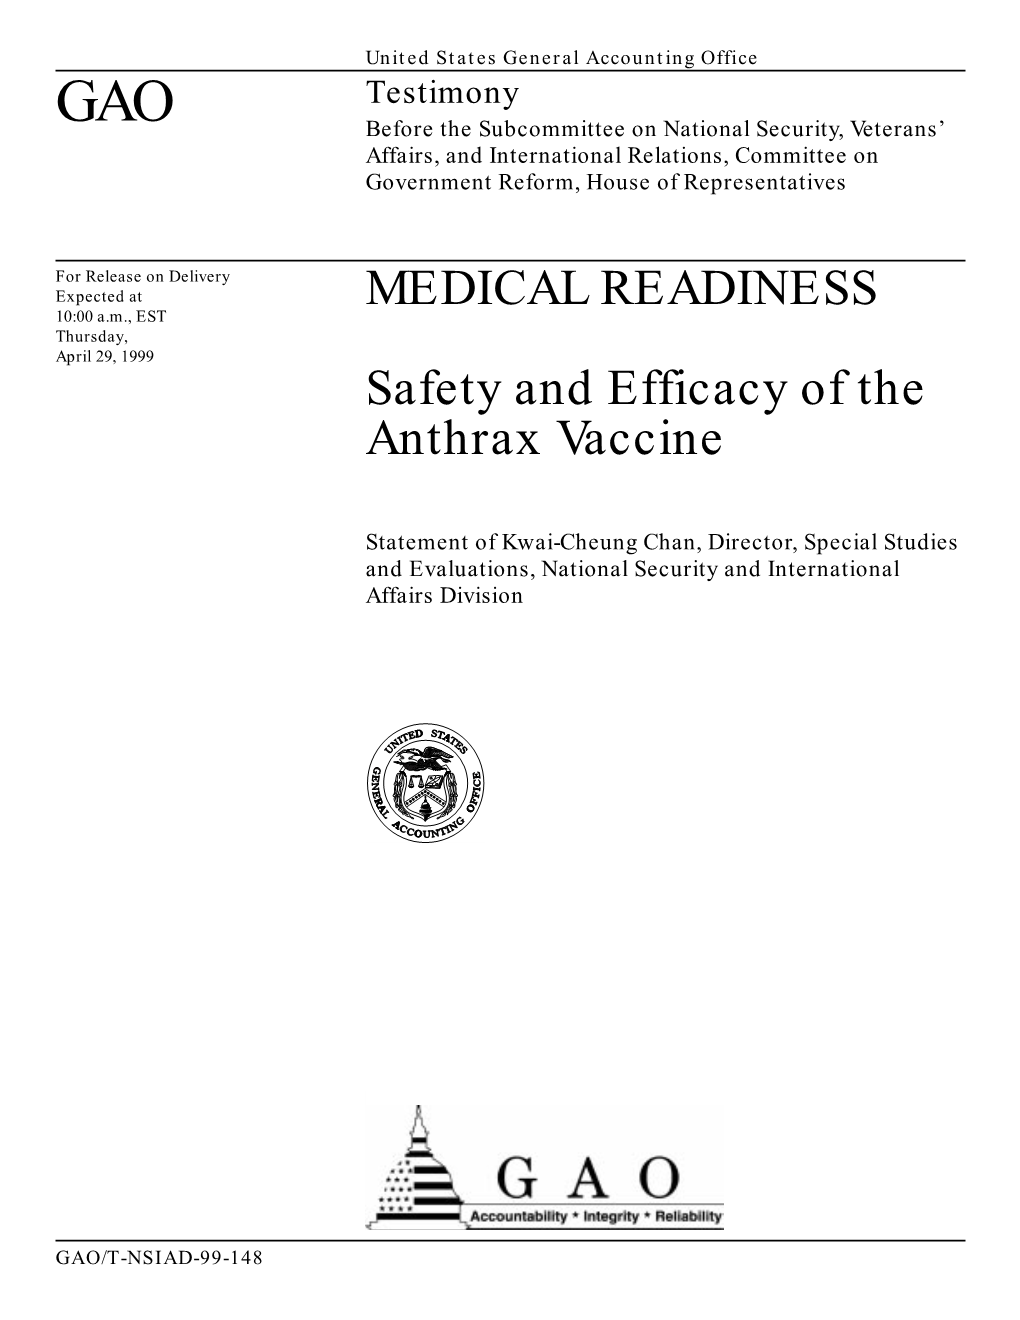 MEDICAL READINESS Safety and Efficacy of the Anthrax Vaccine